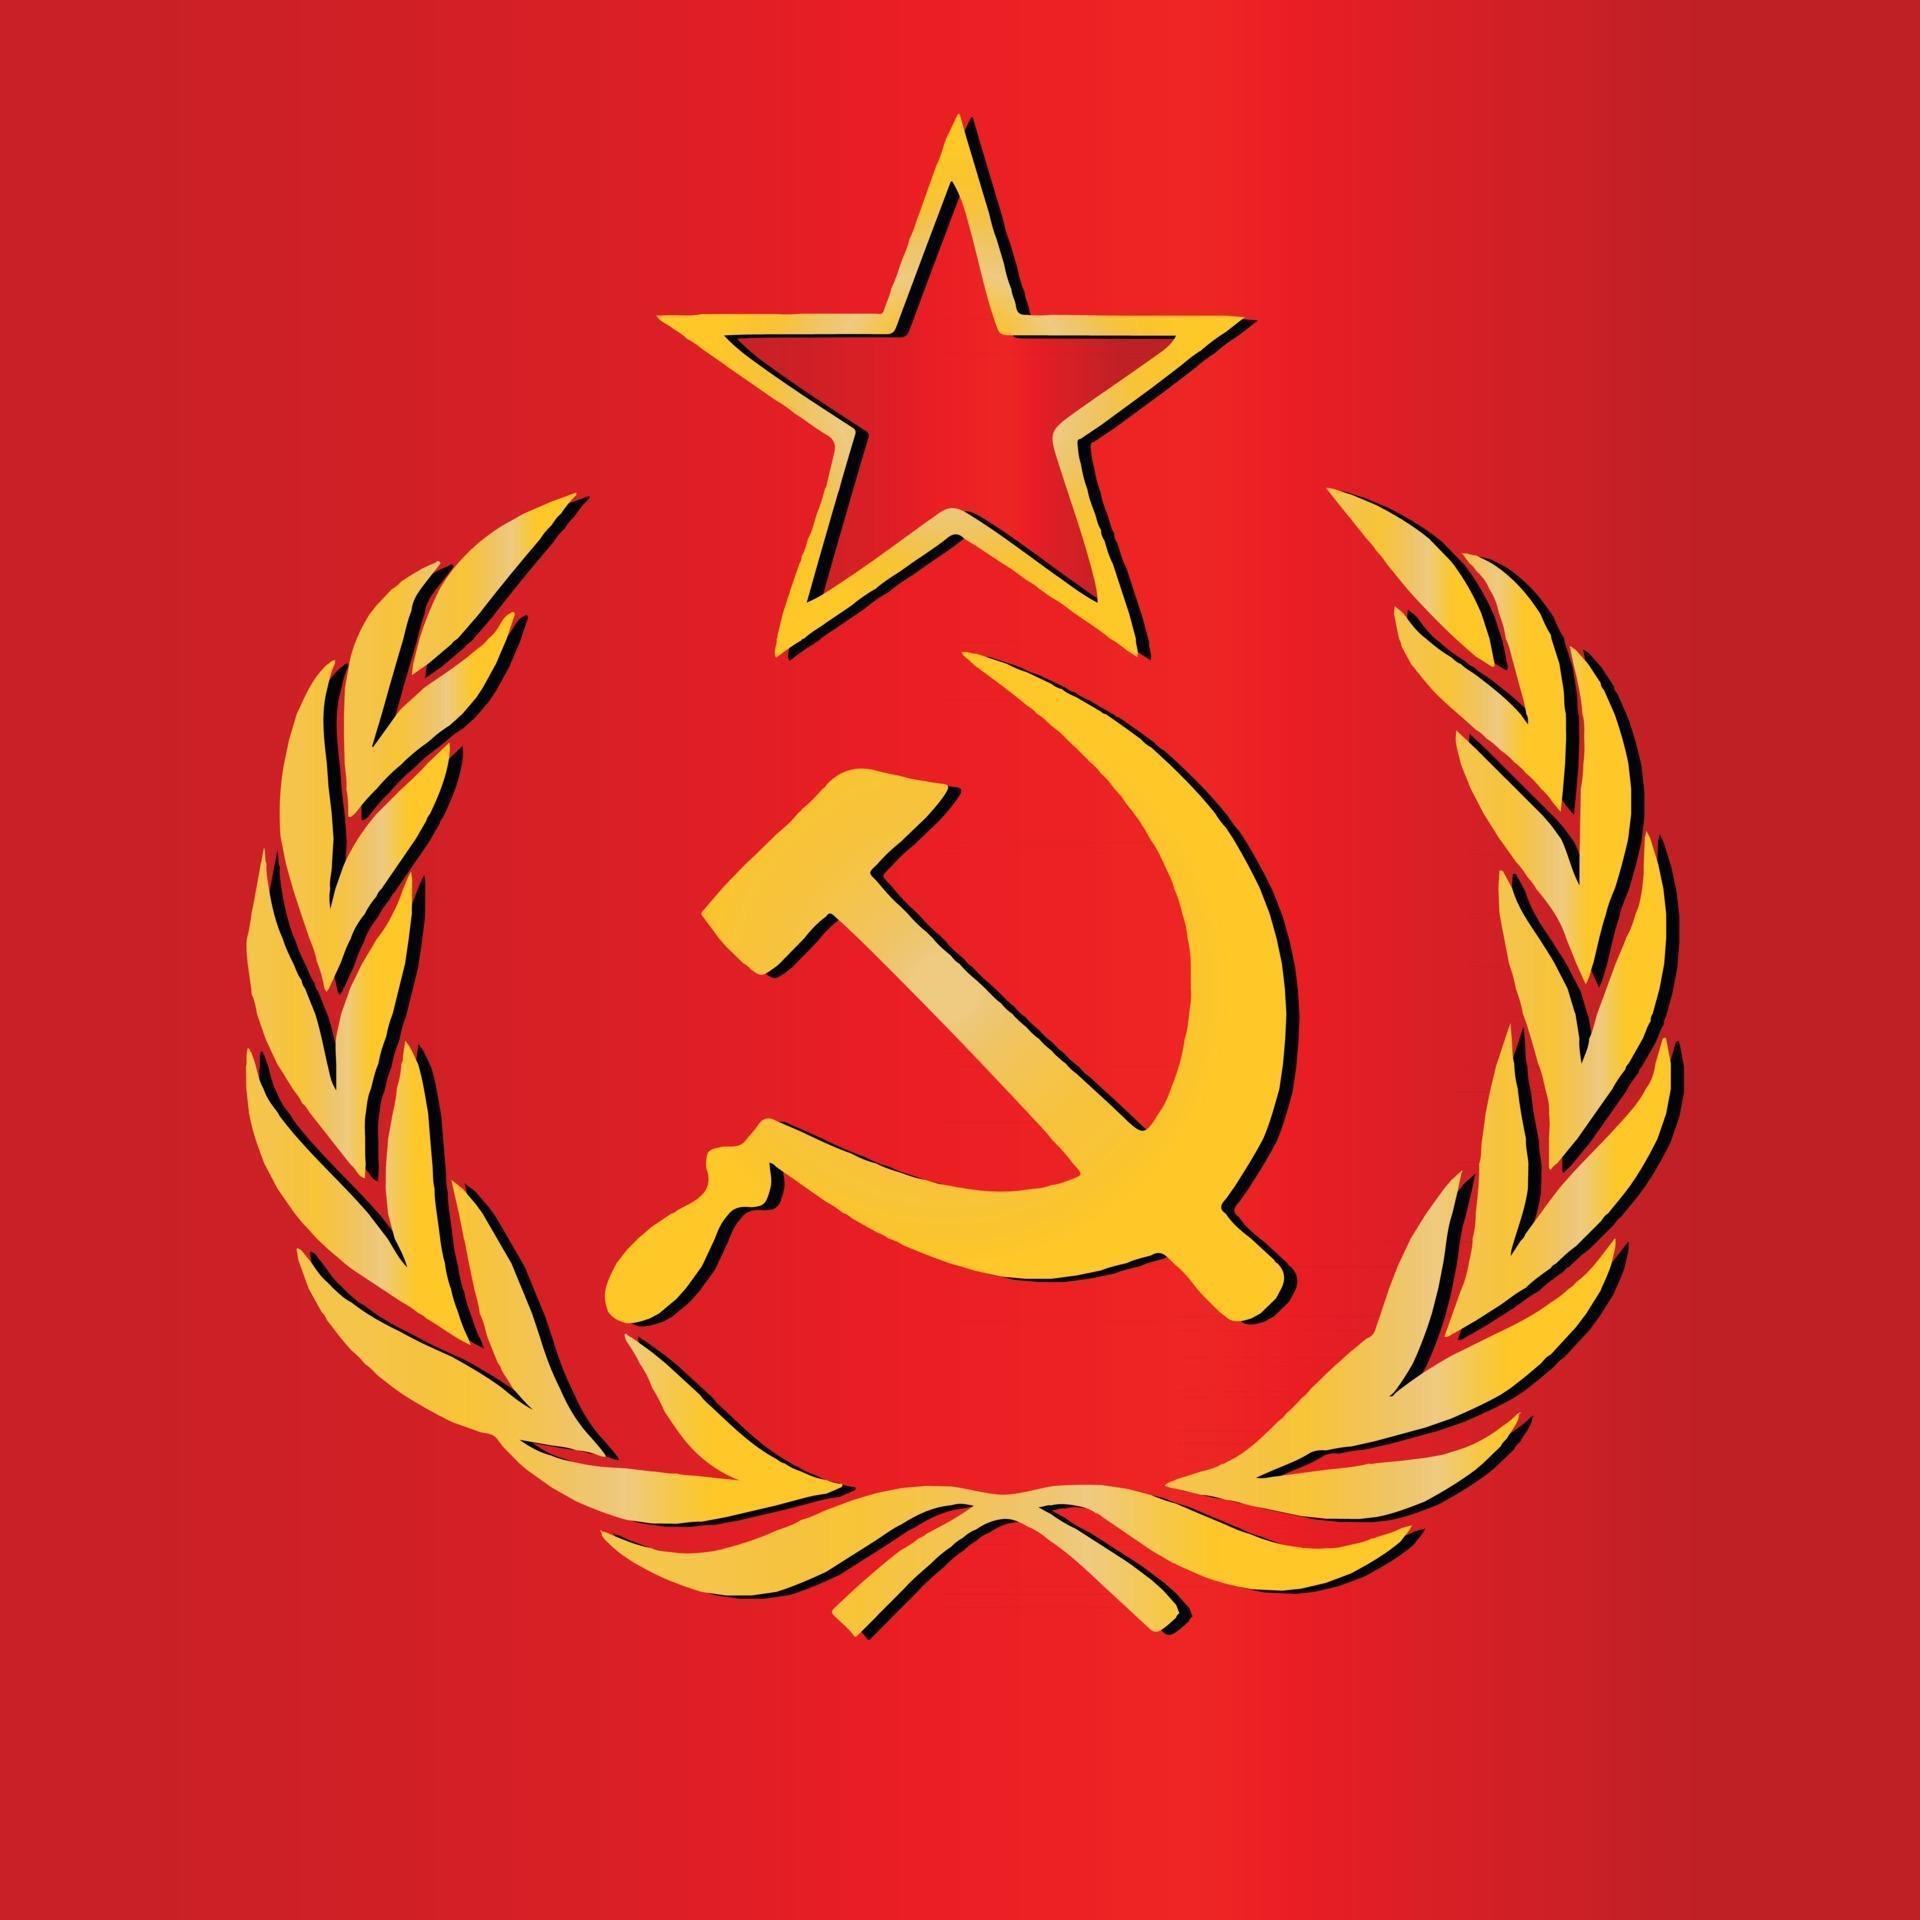 russia-ex-country-flag-soviet-union-ussr-communist-red-army-symbol-icon-logo-free-vector.jpg